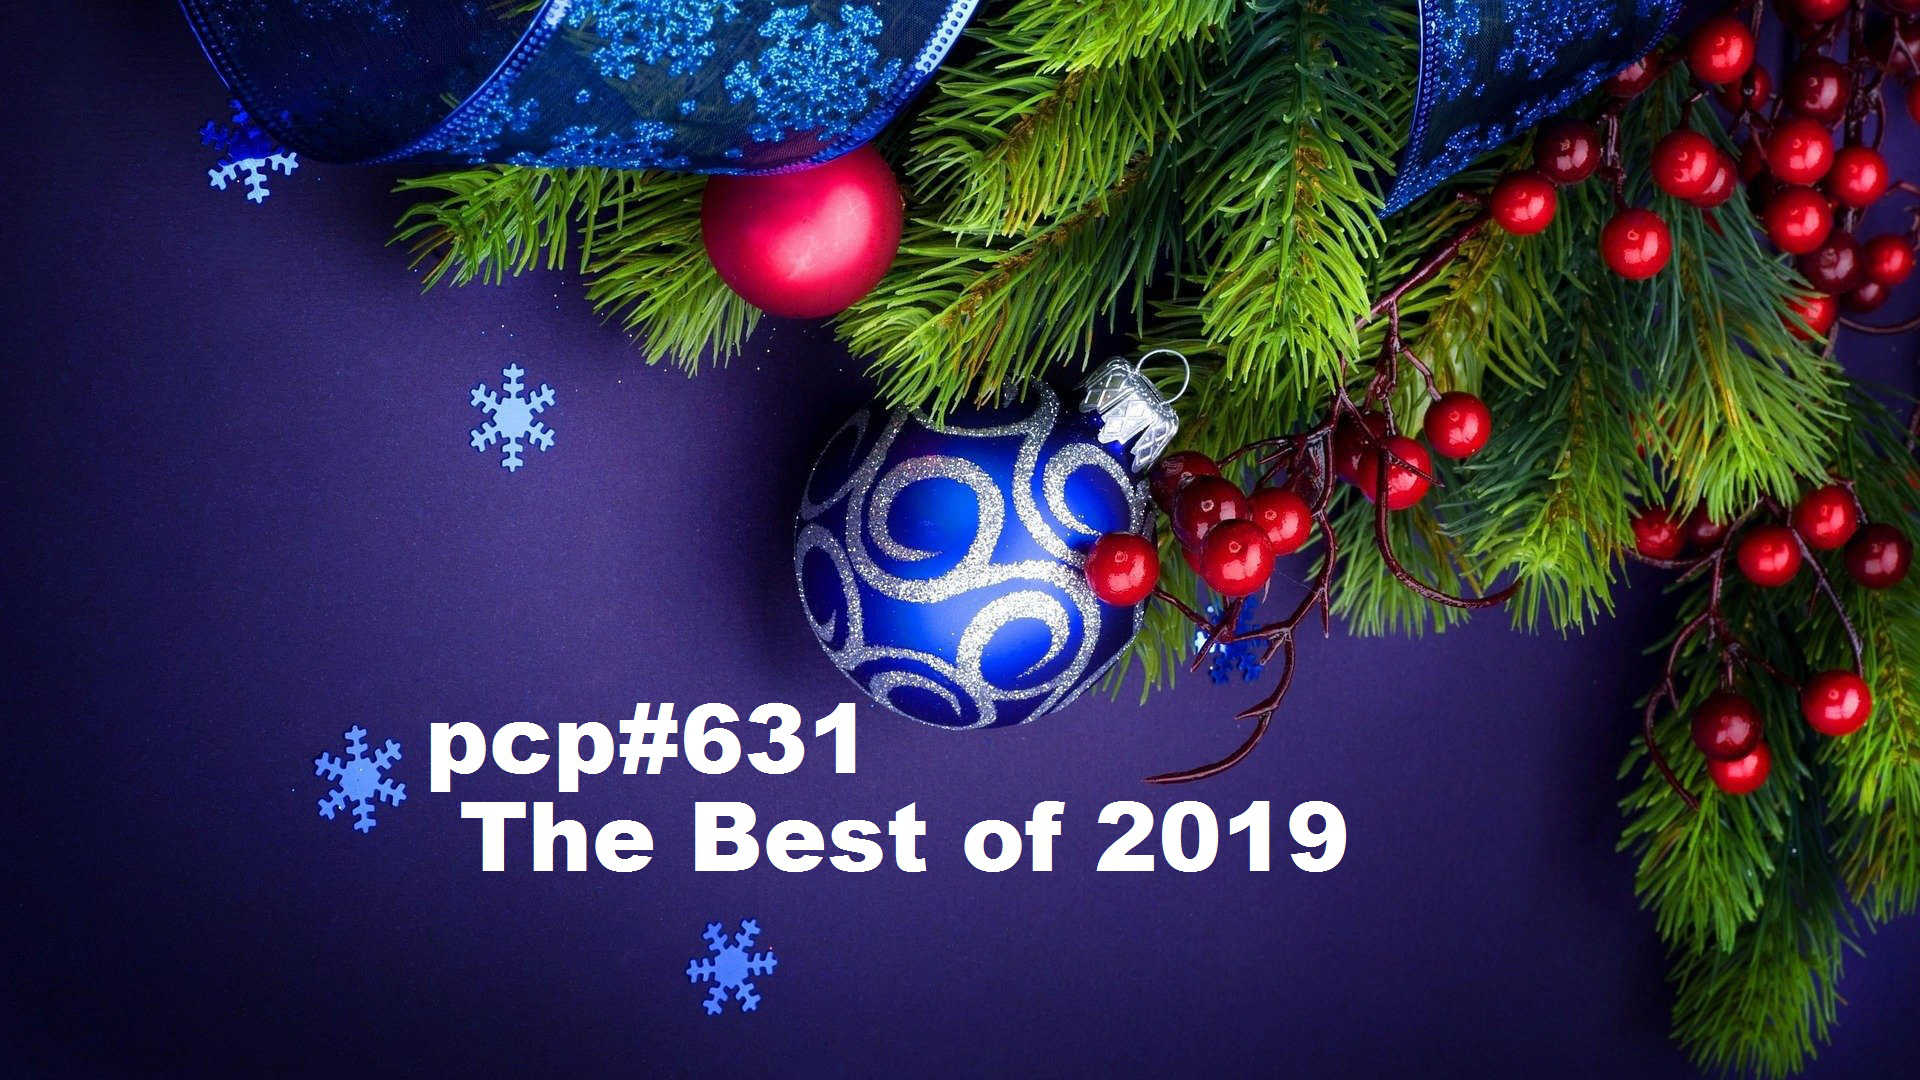 PCP#631... The Best of 2019....